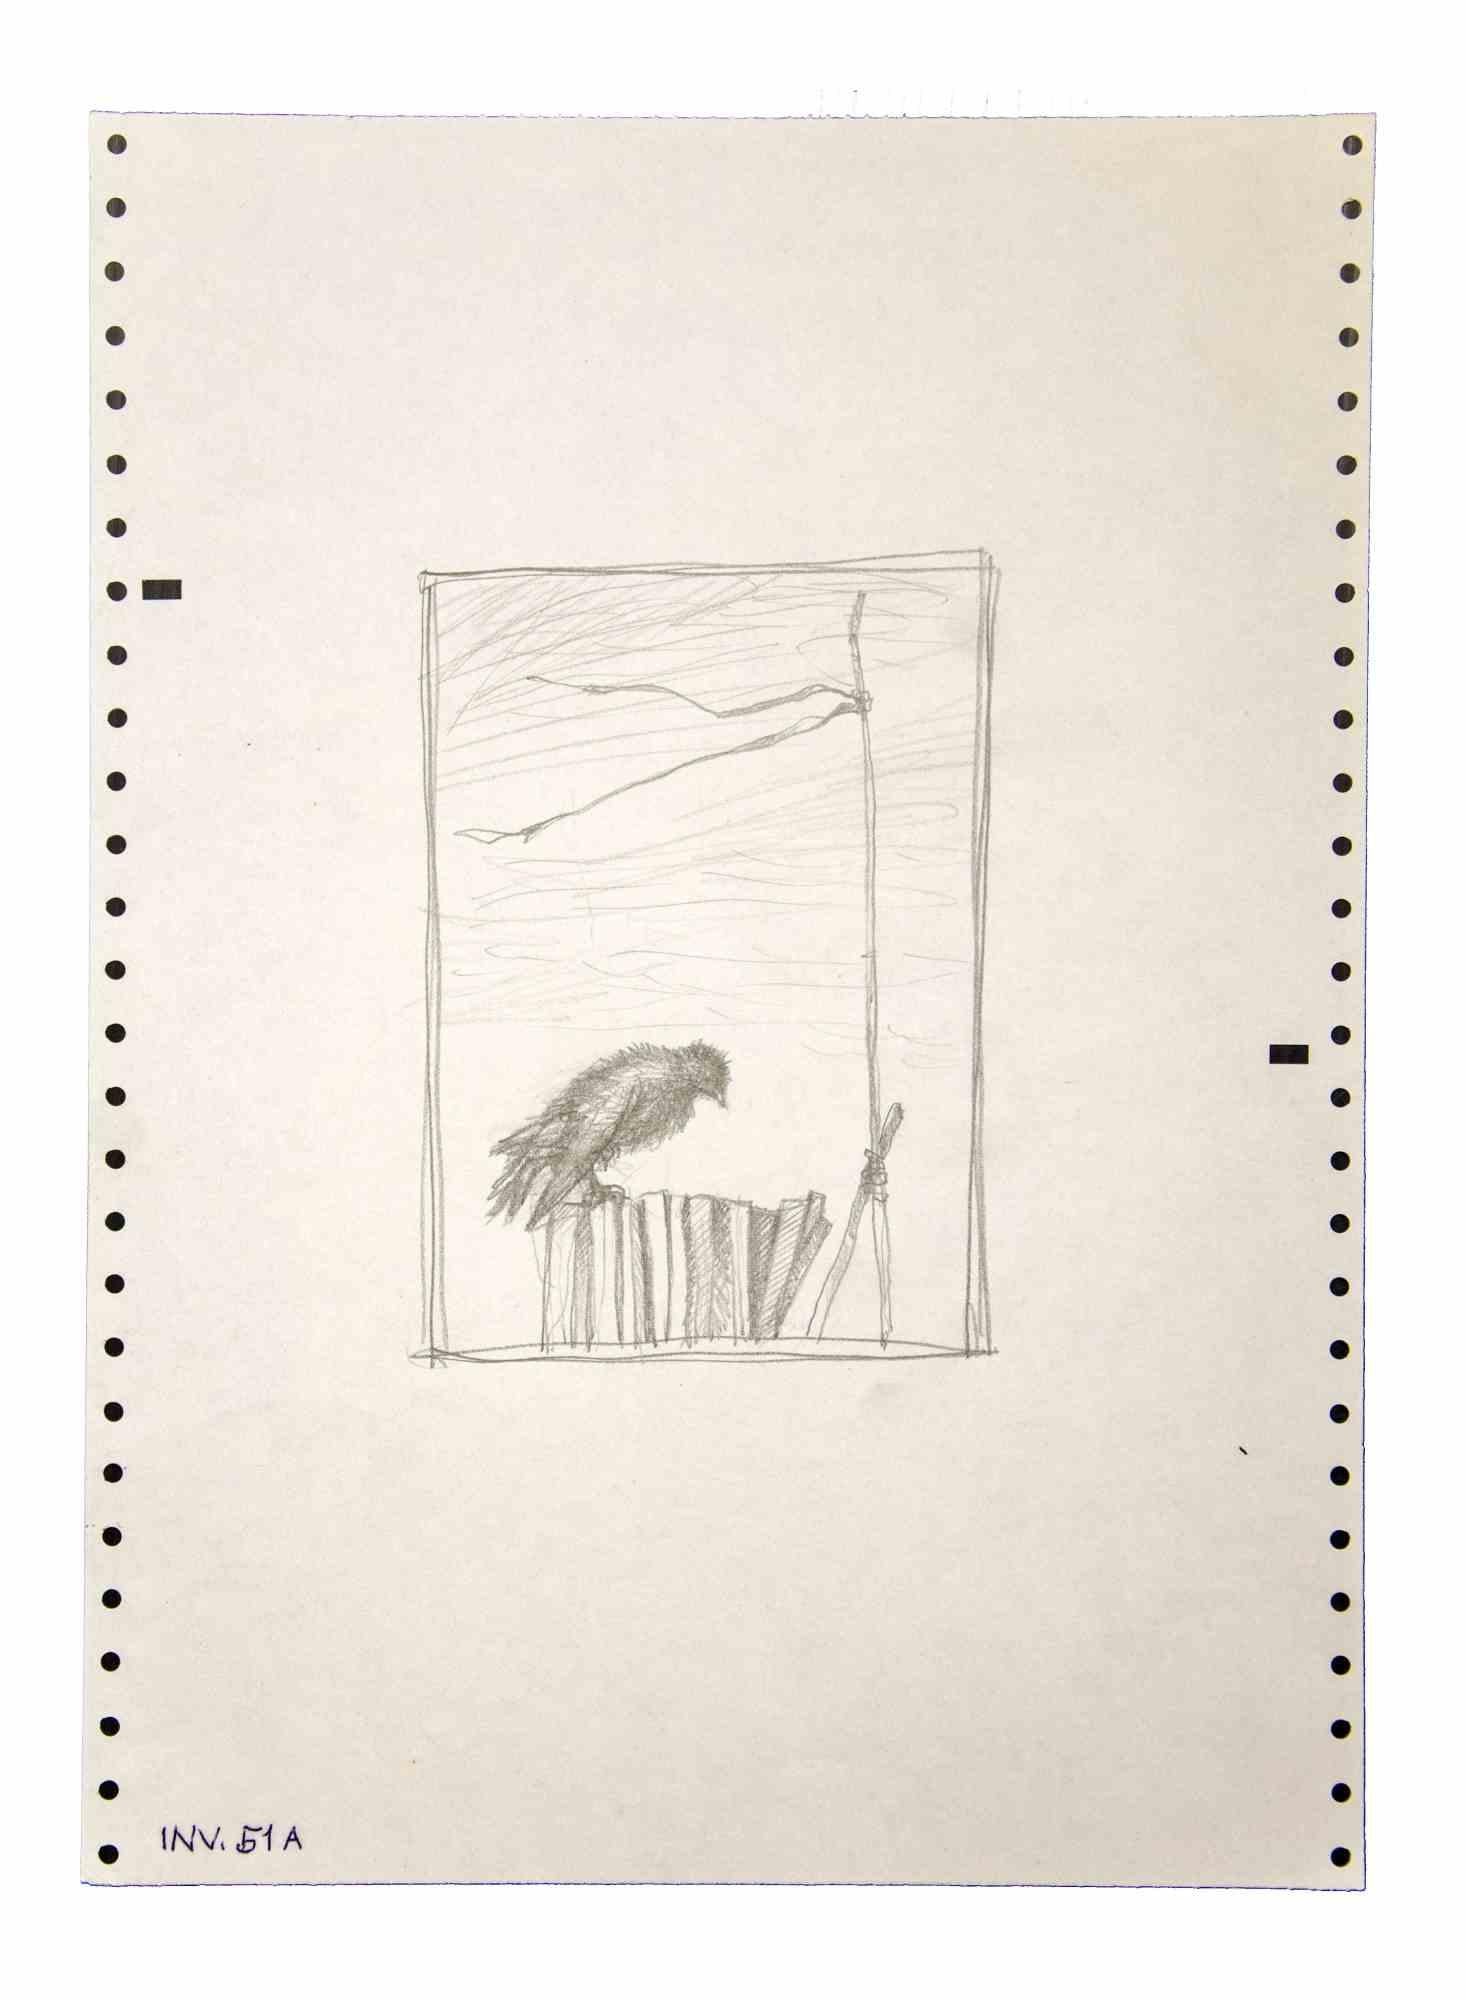 The Bird is an original  artwork realized in the 1970s by the Italian Contemporary artist  Leo Guida  (1992 - 2017).

Original drawings in pencil on paper.

Good conditions but aged.

The artwork is depicted through strong strokes in well-balanced